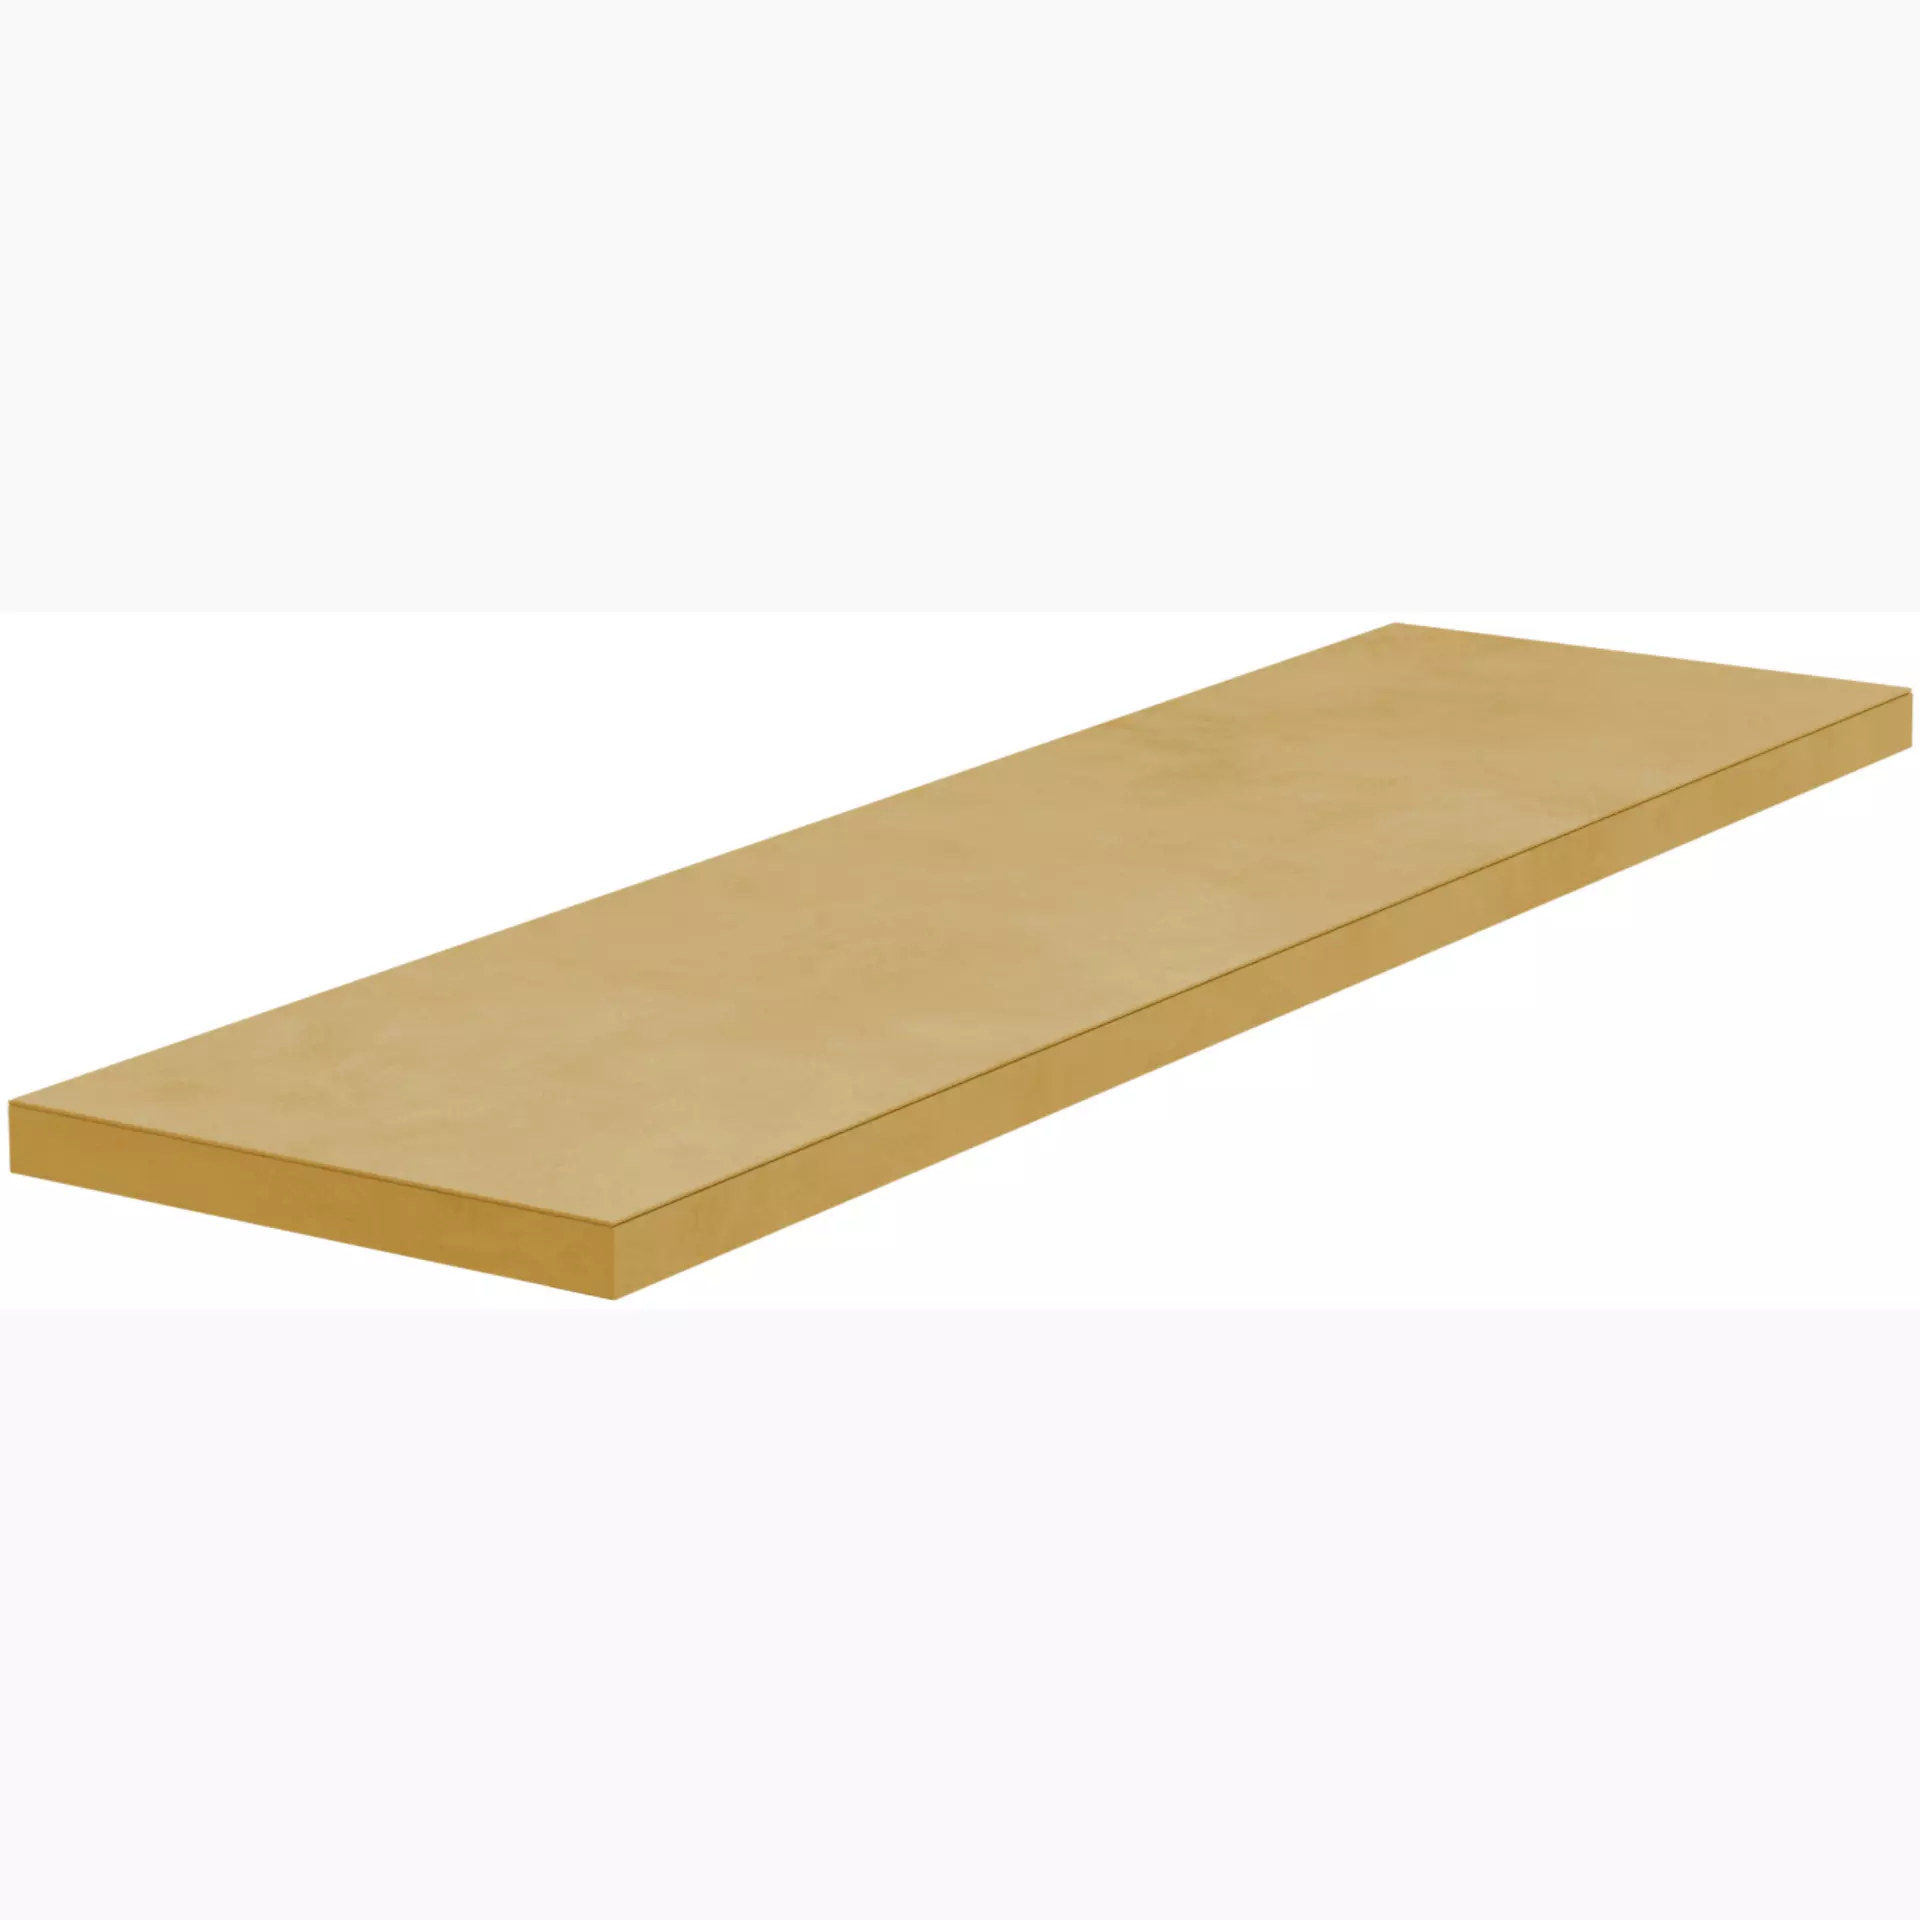 Del Conca Htl Timeline Sun Htl07 Naturale Corner plate Step Right G3TL07RGD12 33x120cm rectified 8,5mm